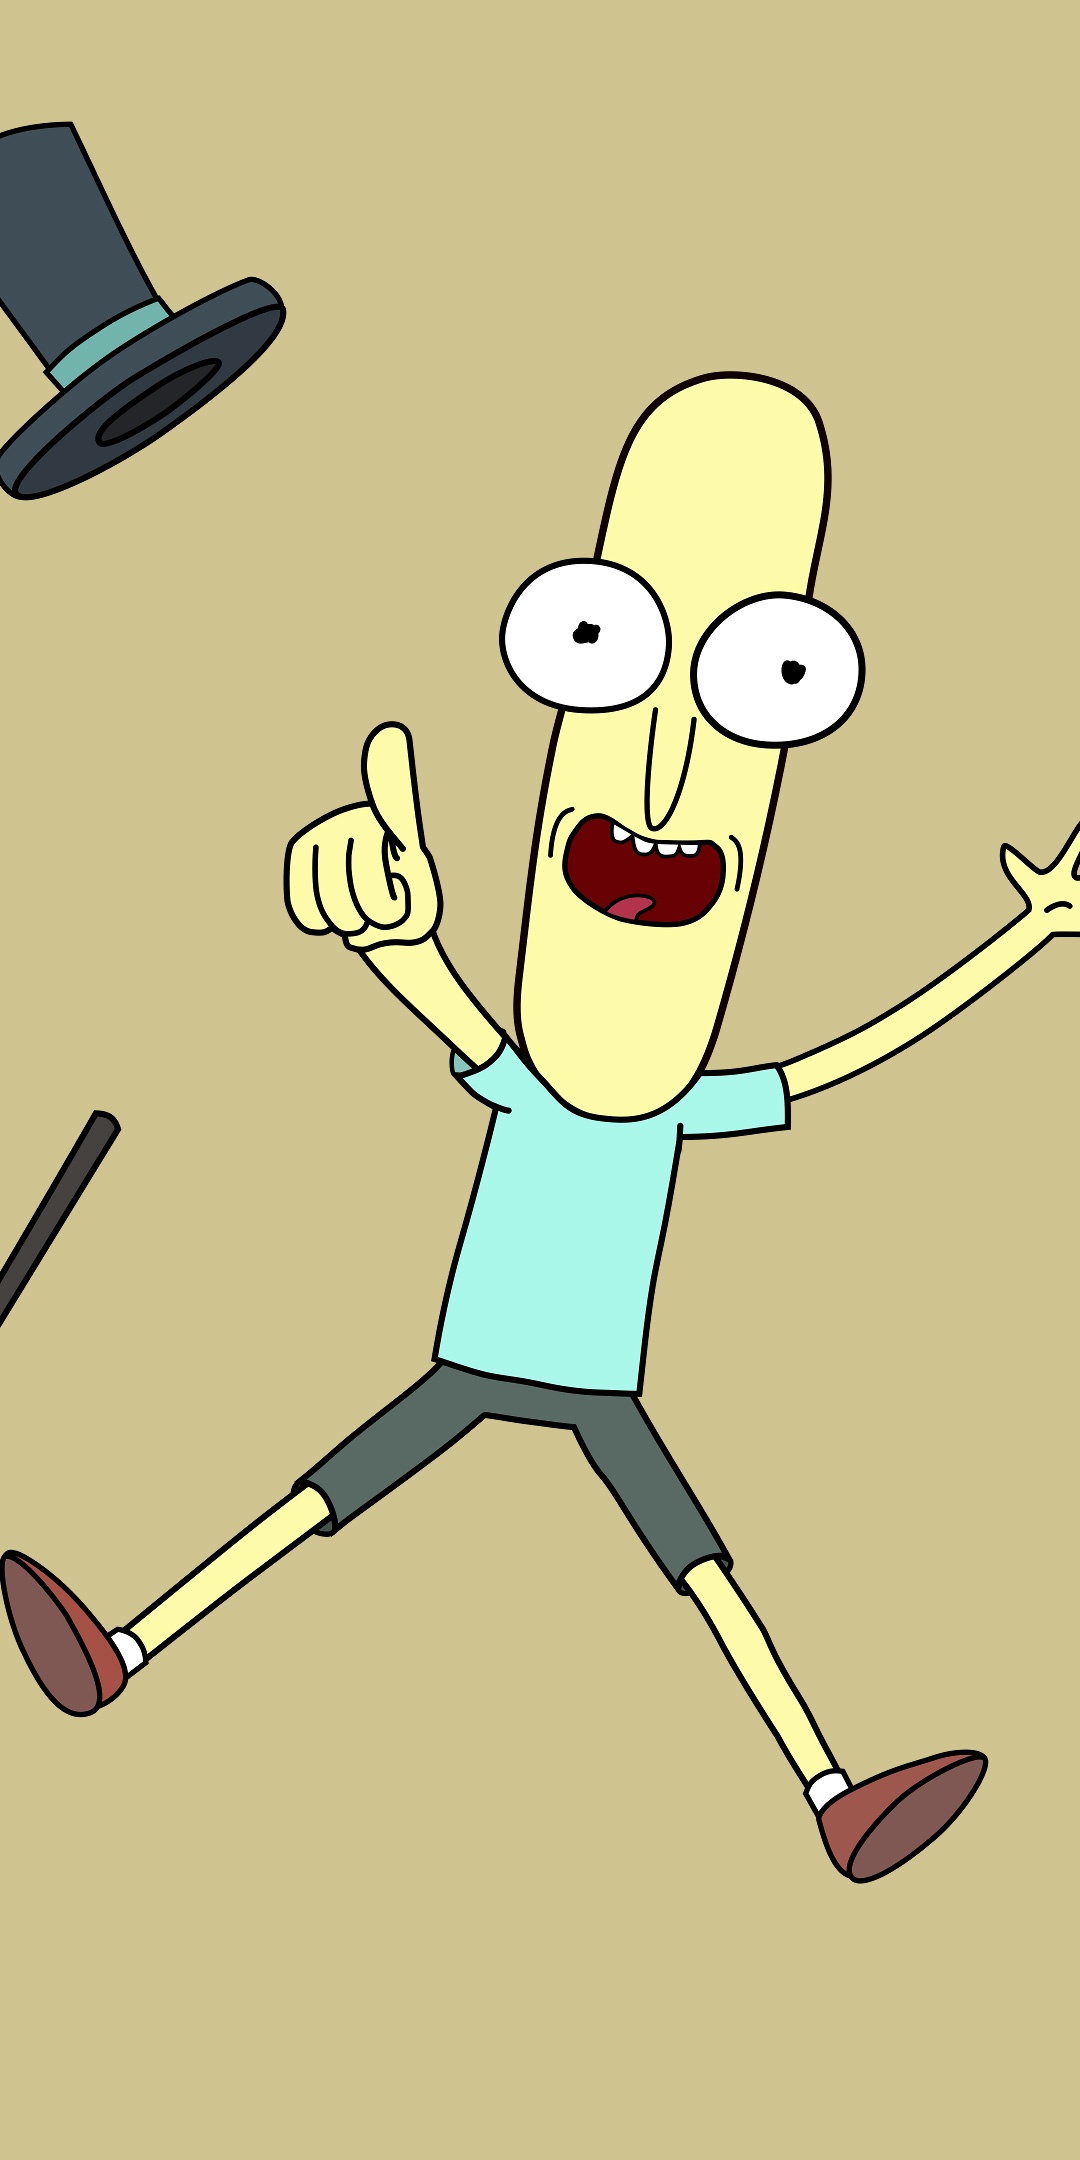 Wallpaper / TV Show Rick and Morty Phone Wallpaper, Mr. Poopybutthole (Rick And Morty), 1080x2160 free download